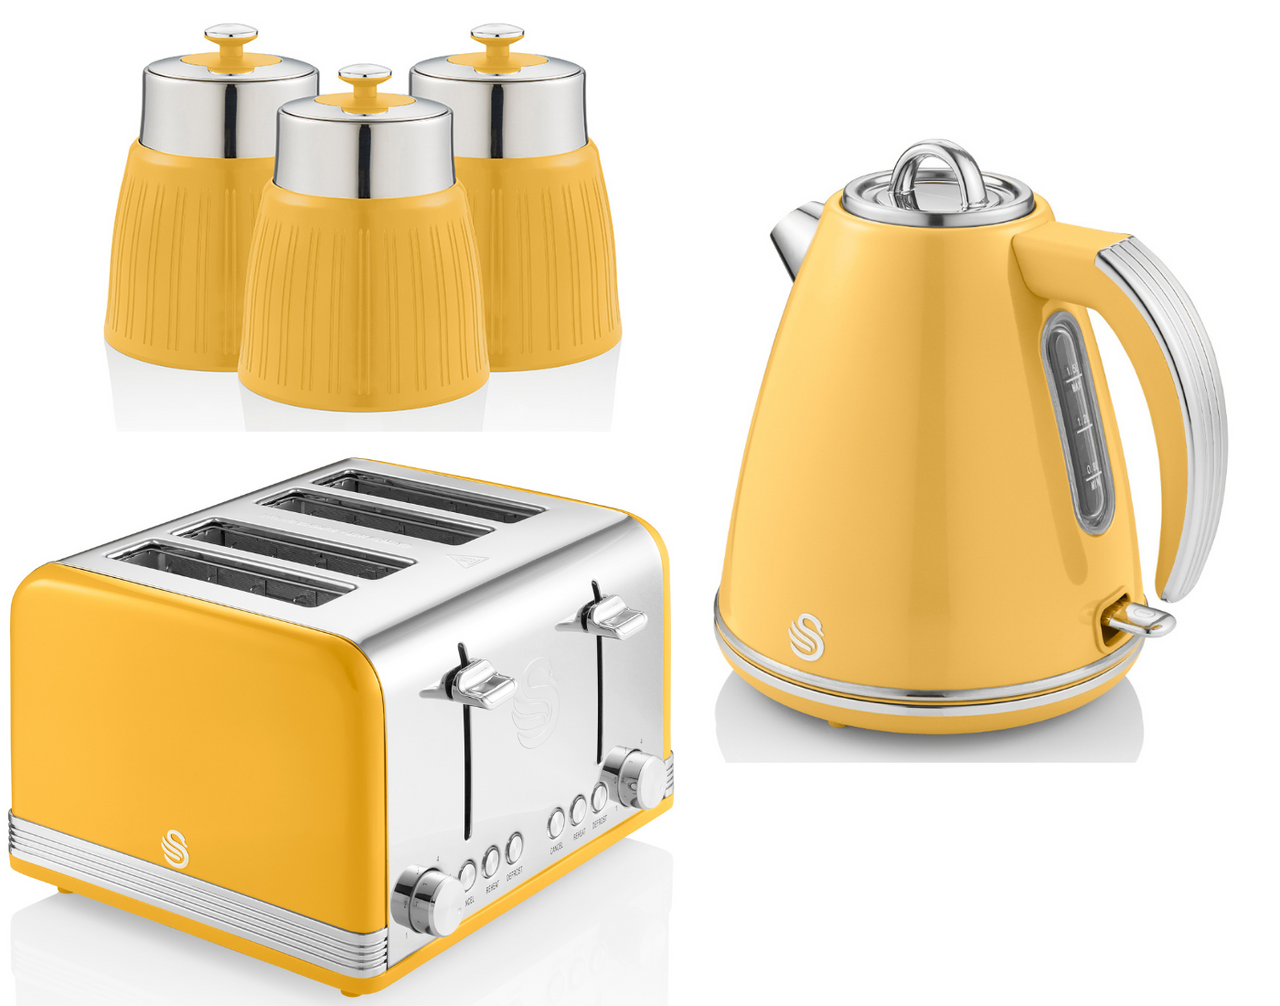 Swan Retro Yellow Jug Kettle 4 Slice Toaster & 3 Storage Canisters Kitchen Set